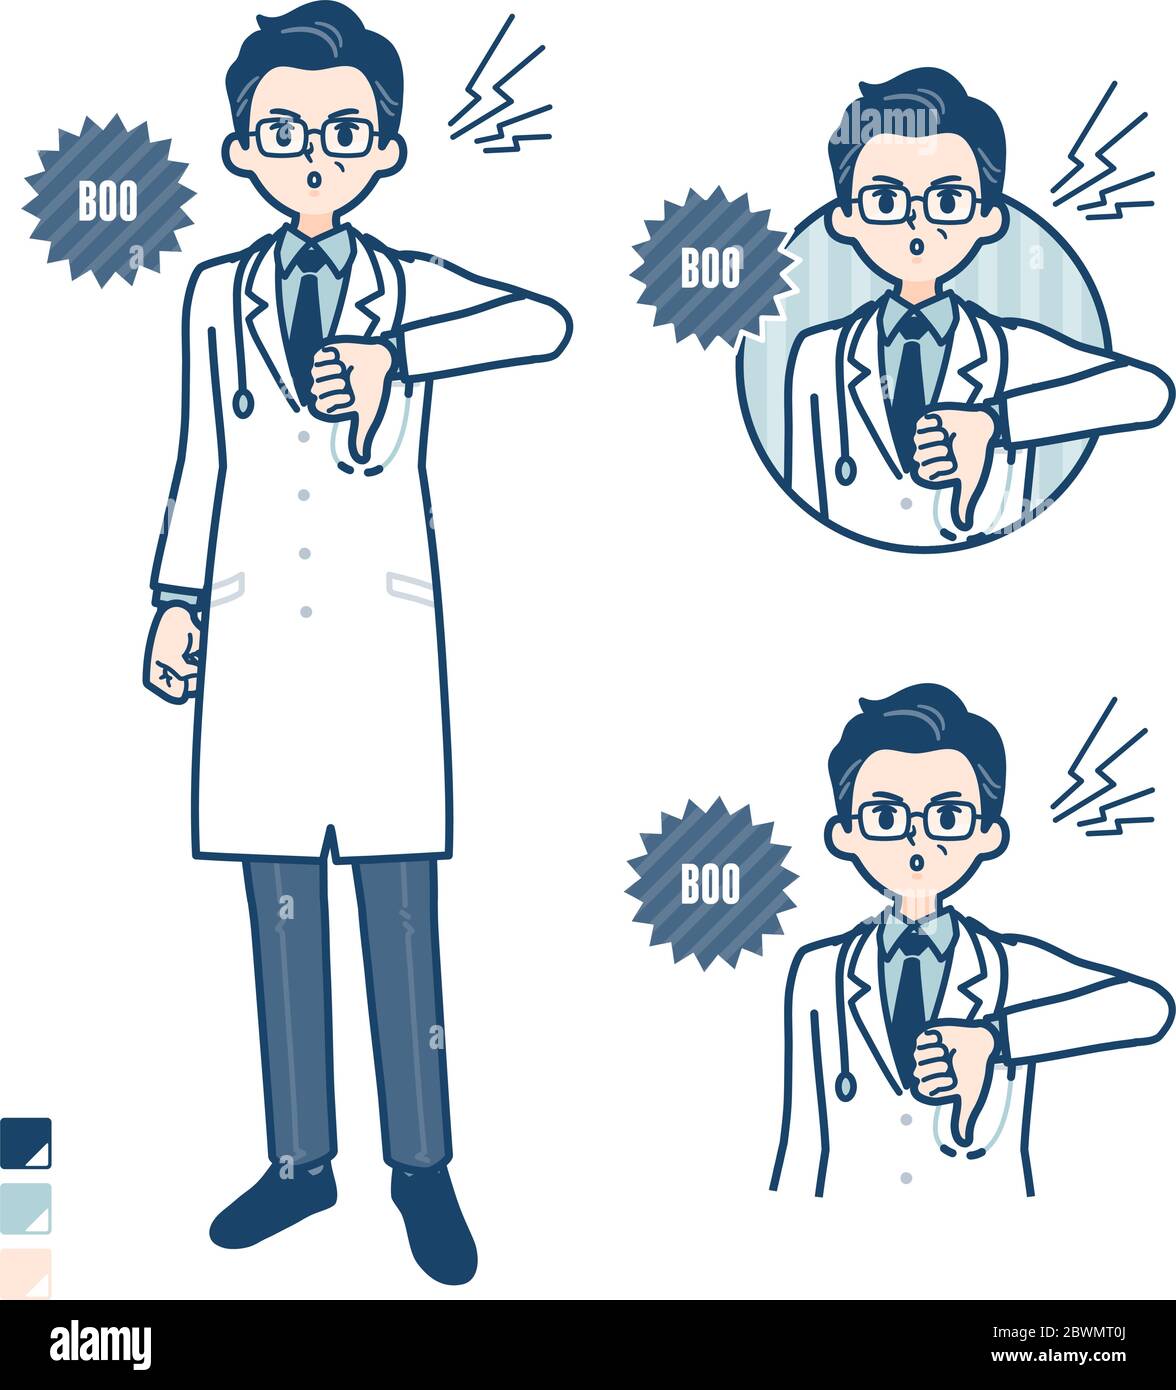 Old Doctor In A White Coat With Booing Images Its Vector Art So Its Easy To Edit Stock Vector